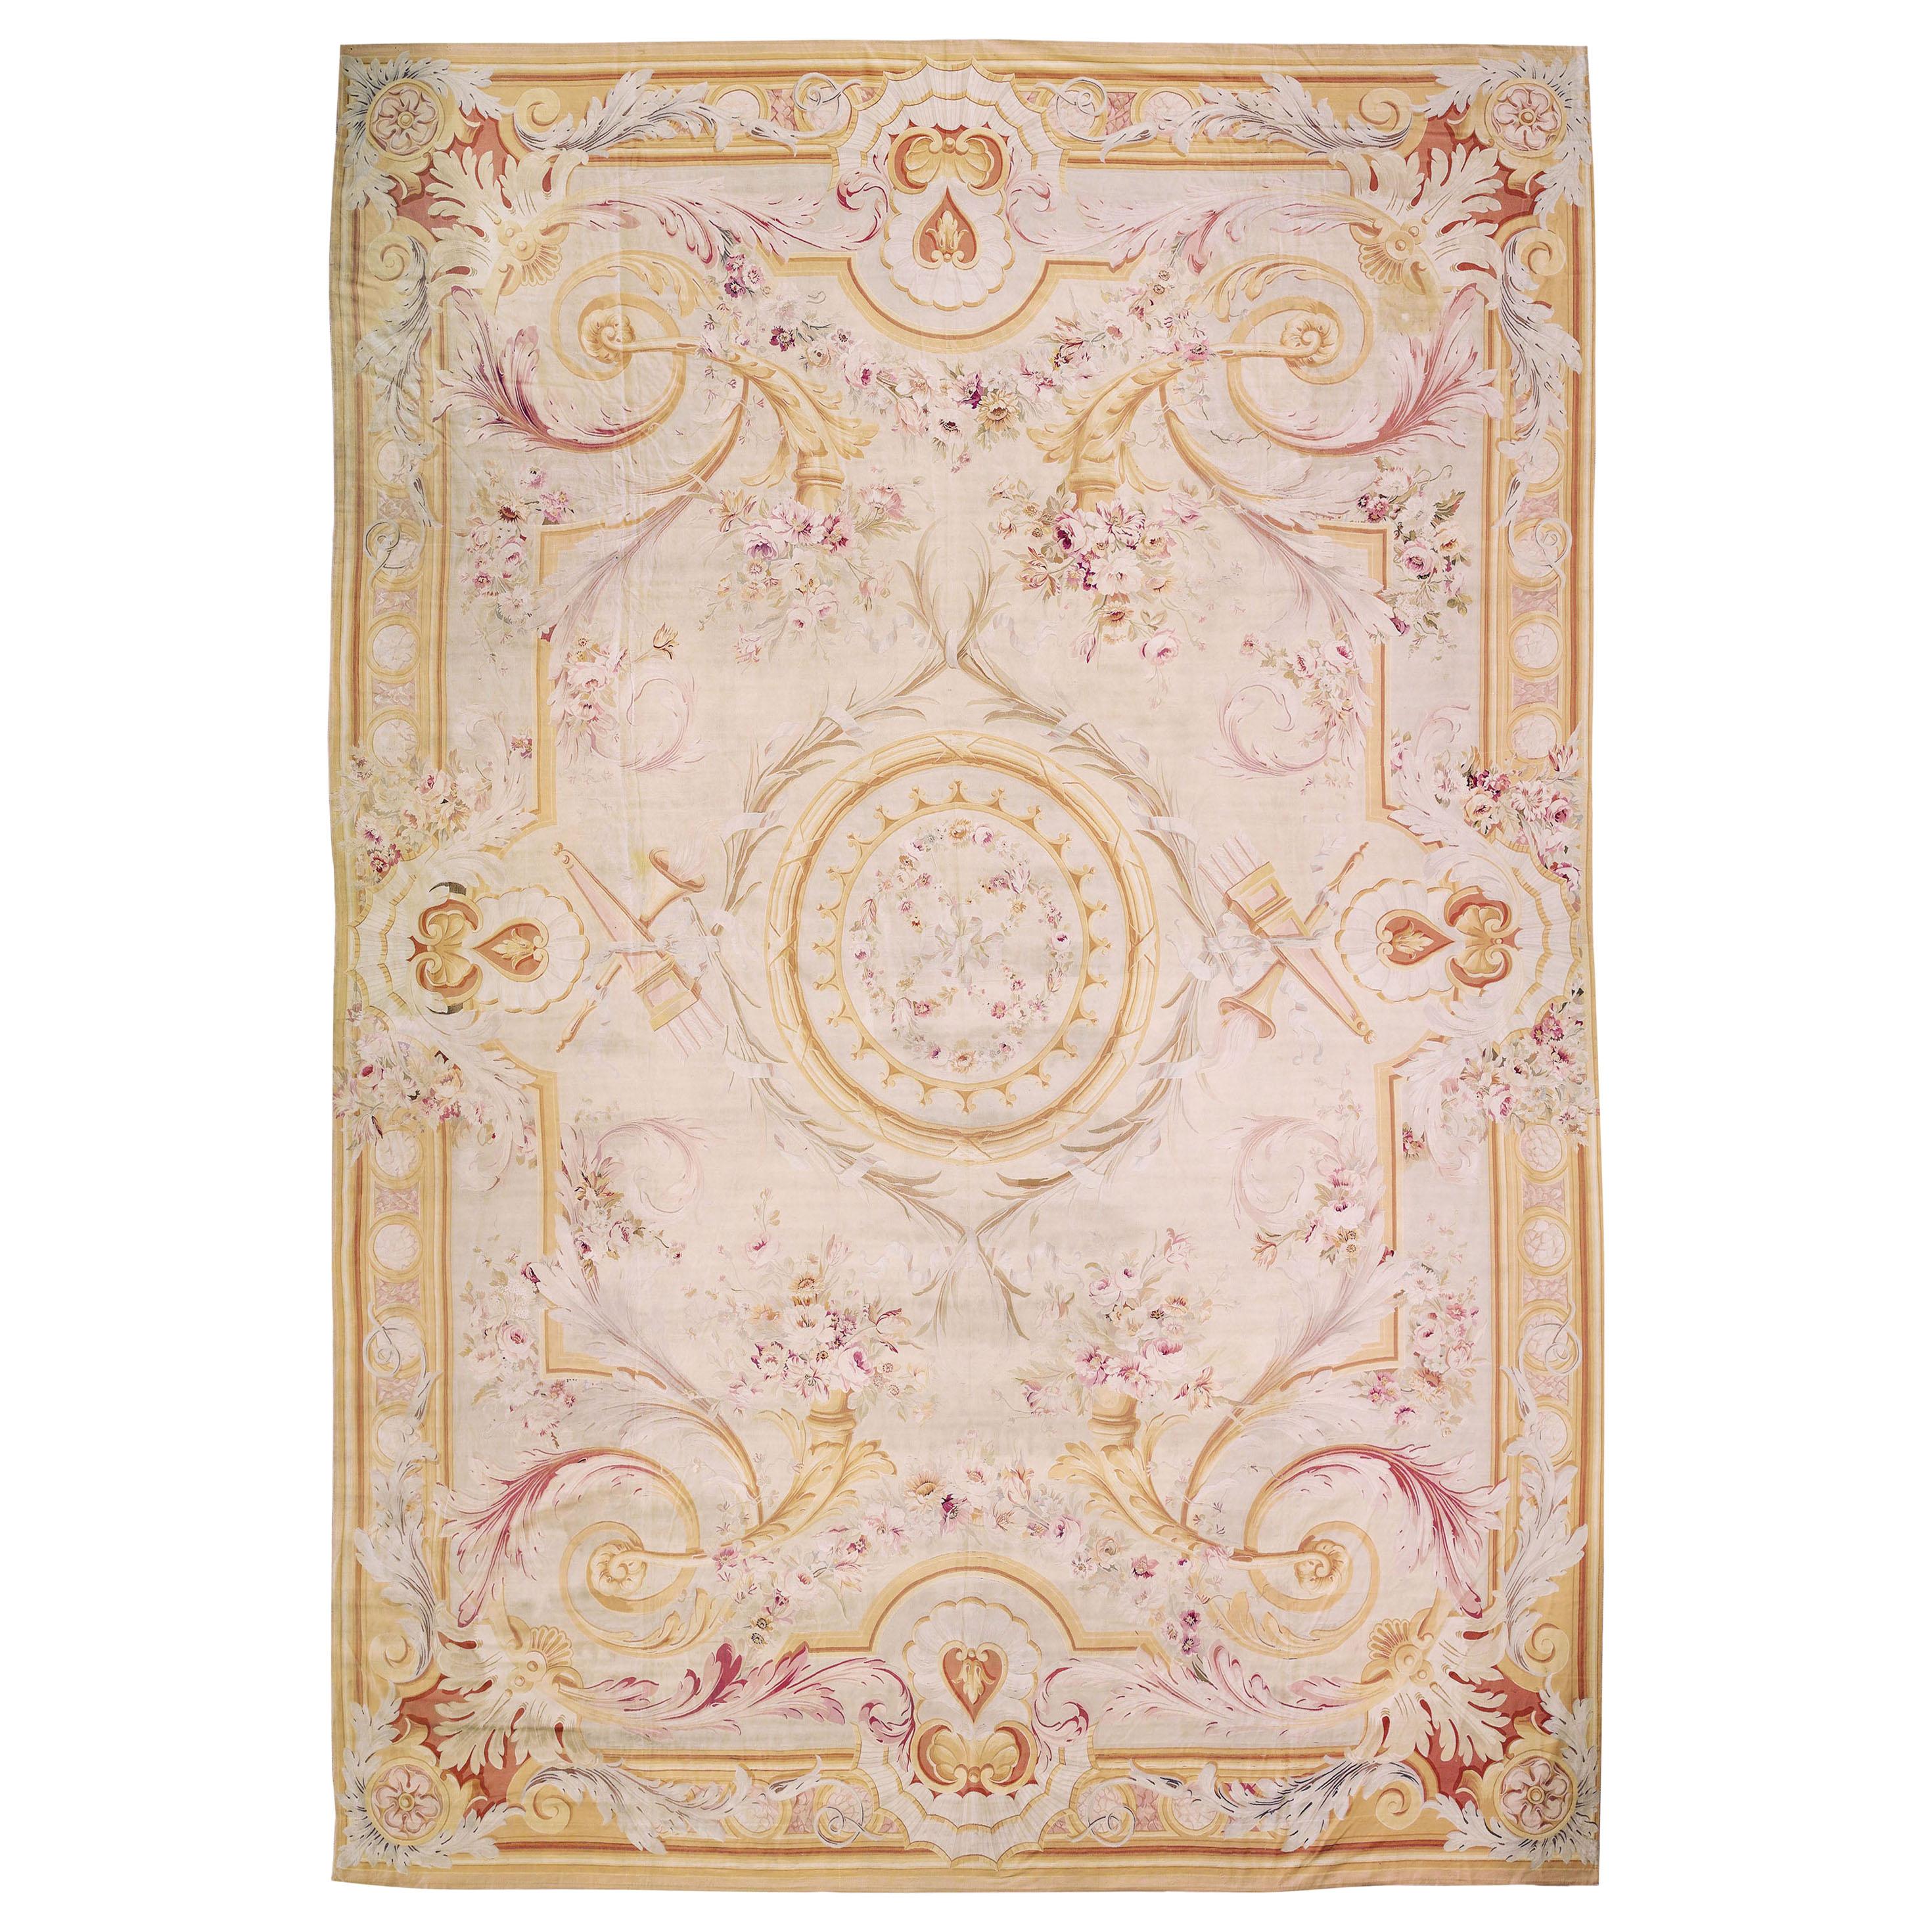 Oversize Antique French Aubusson Rug Carpet, circa 1890  21' x 32' For Sale